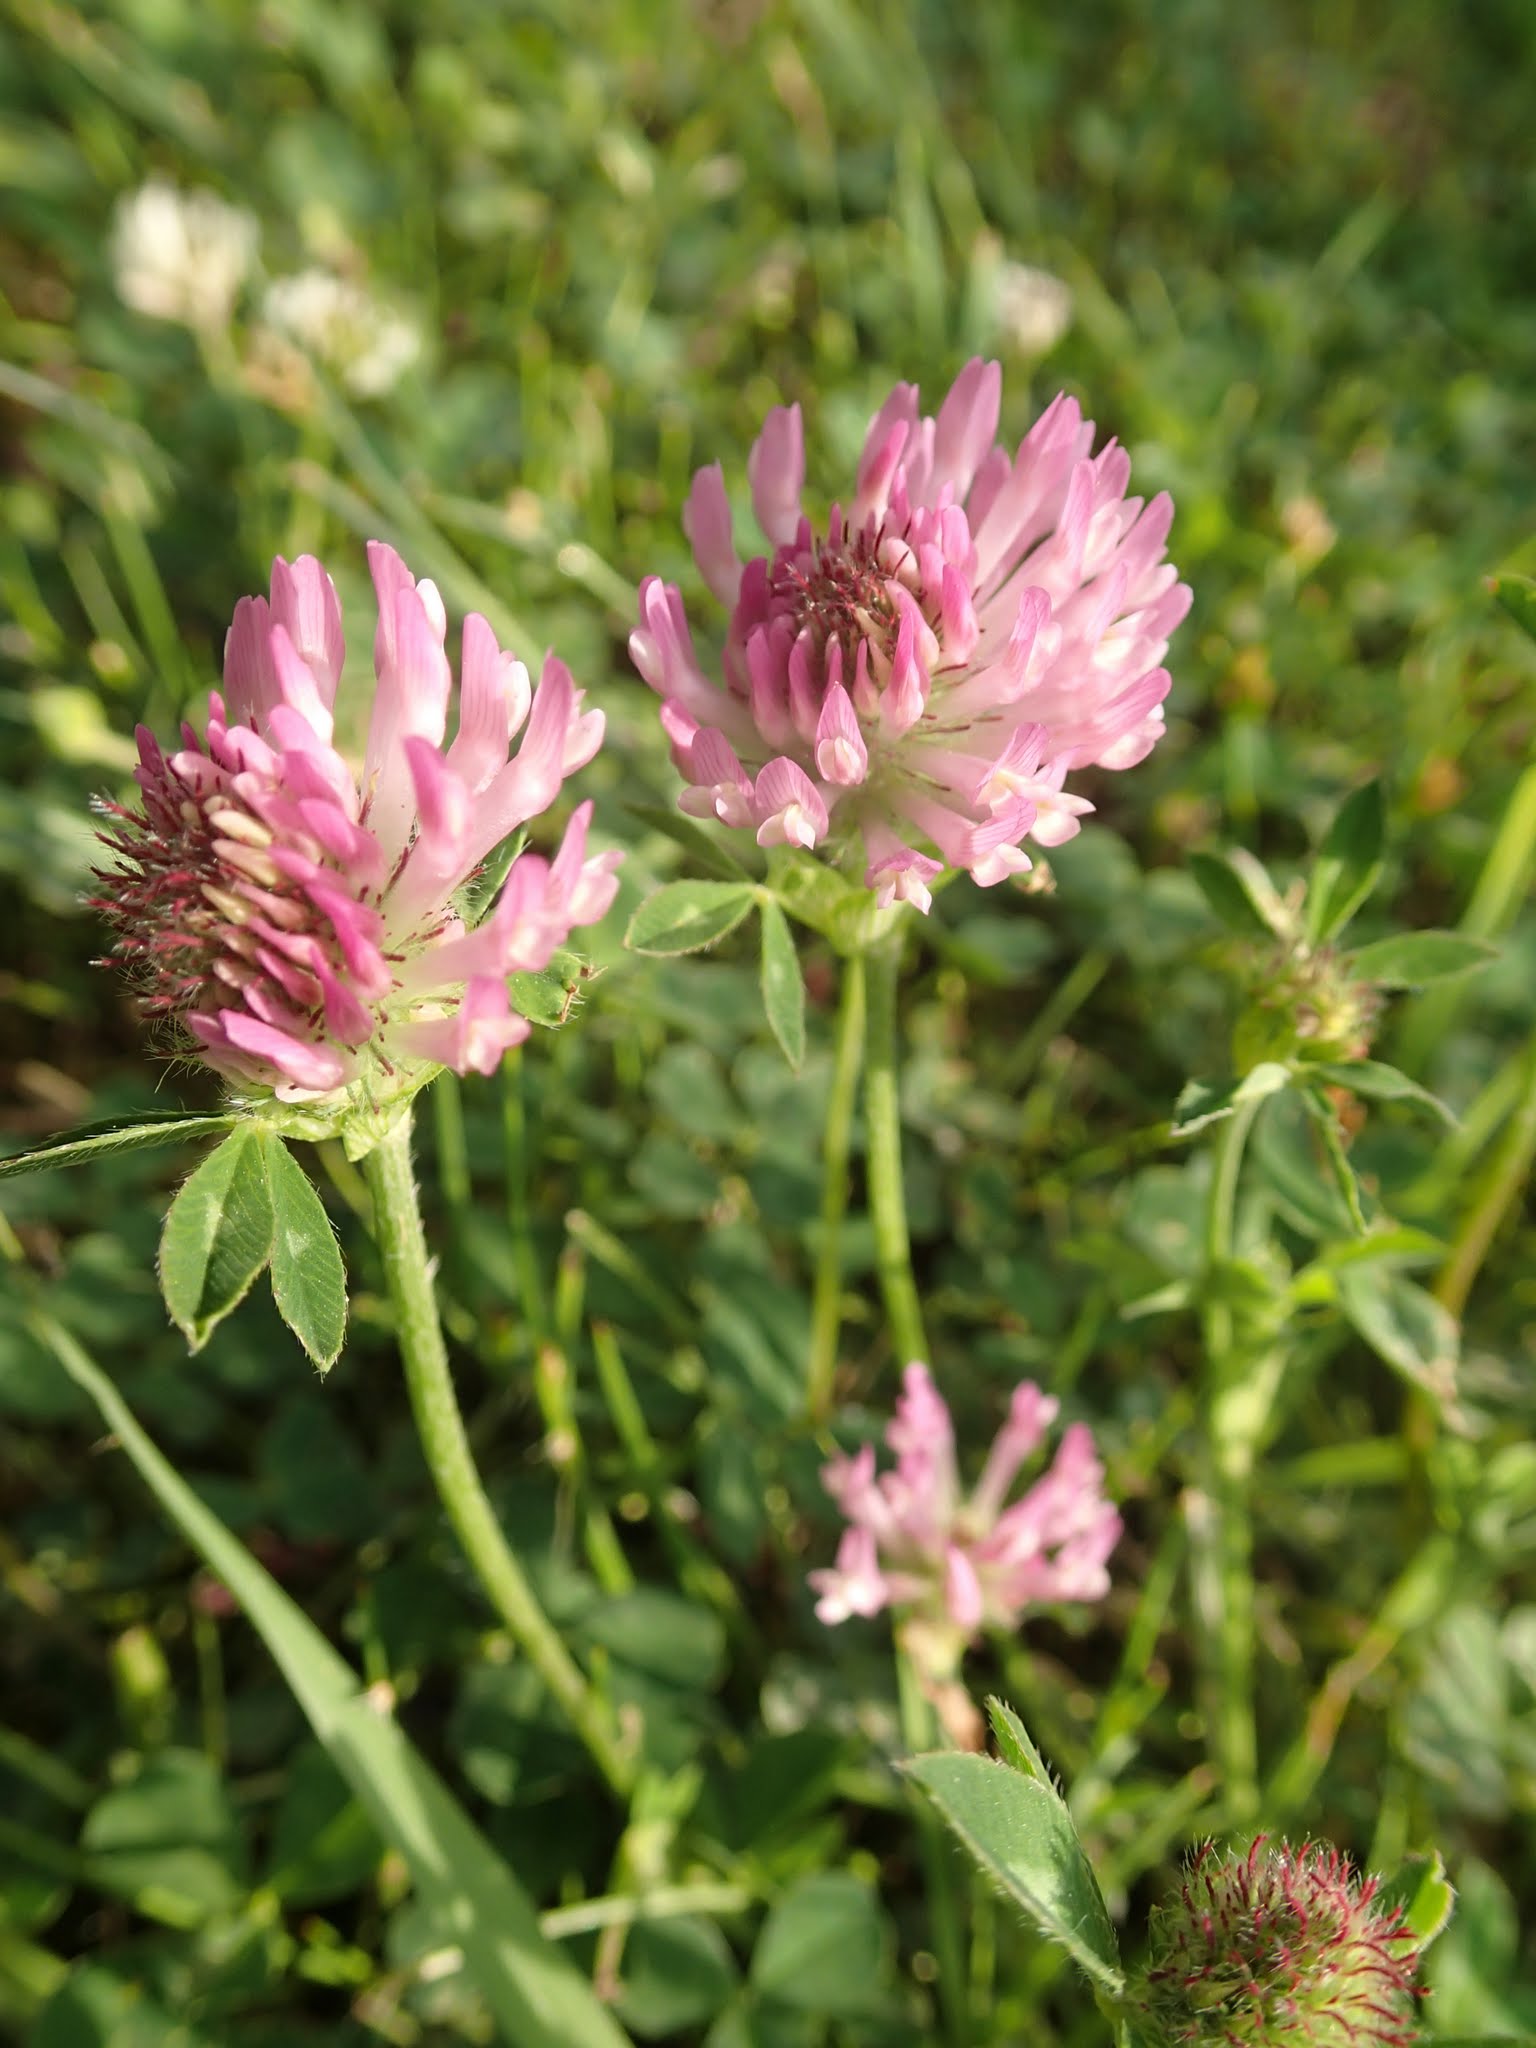 Red Clover - photo by Amanda Wilkins